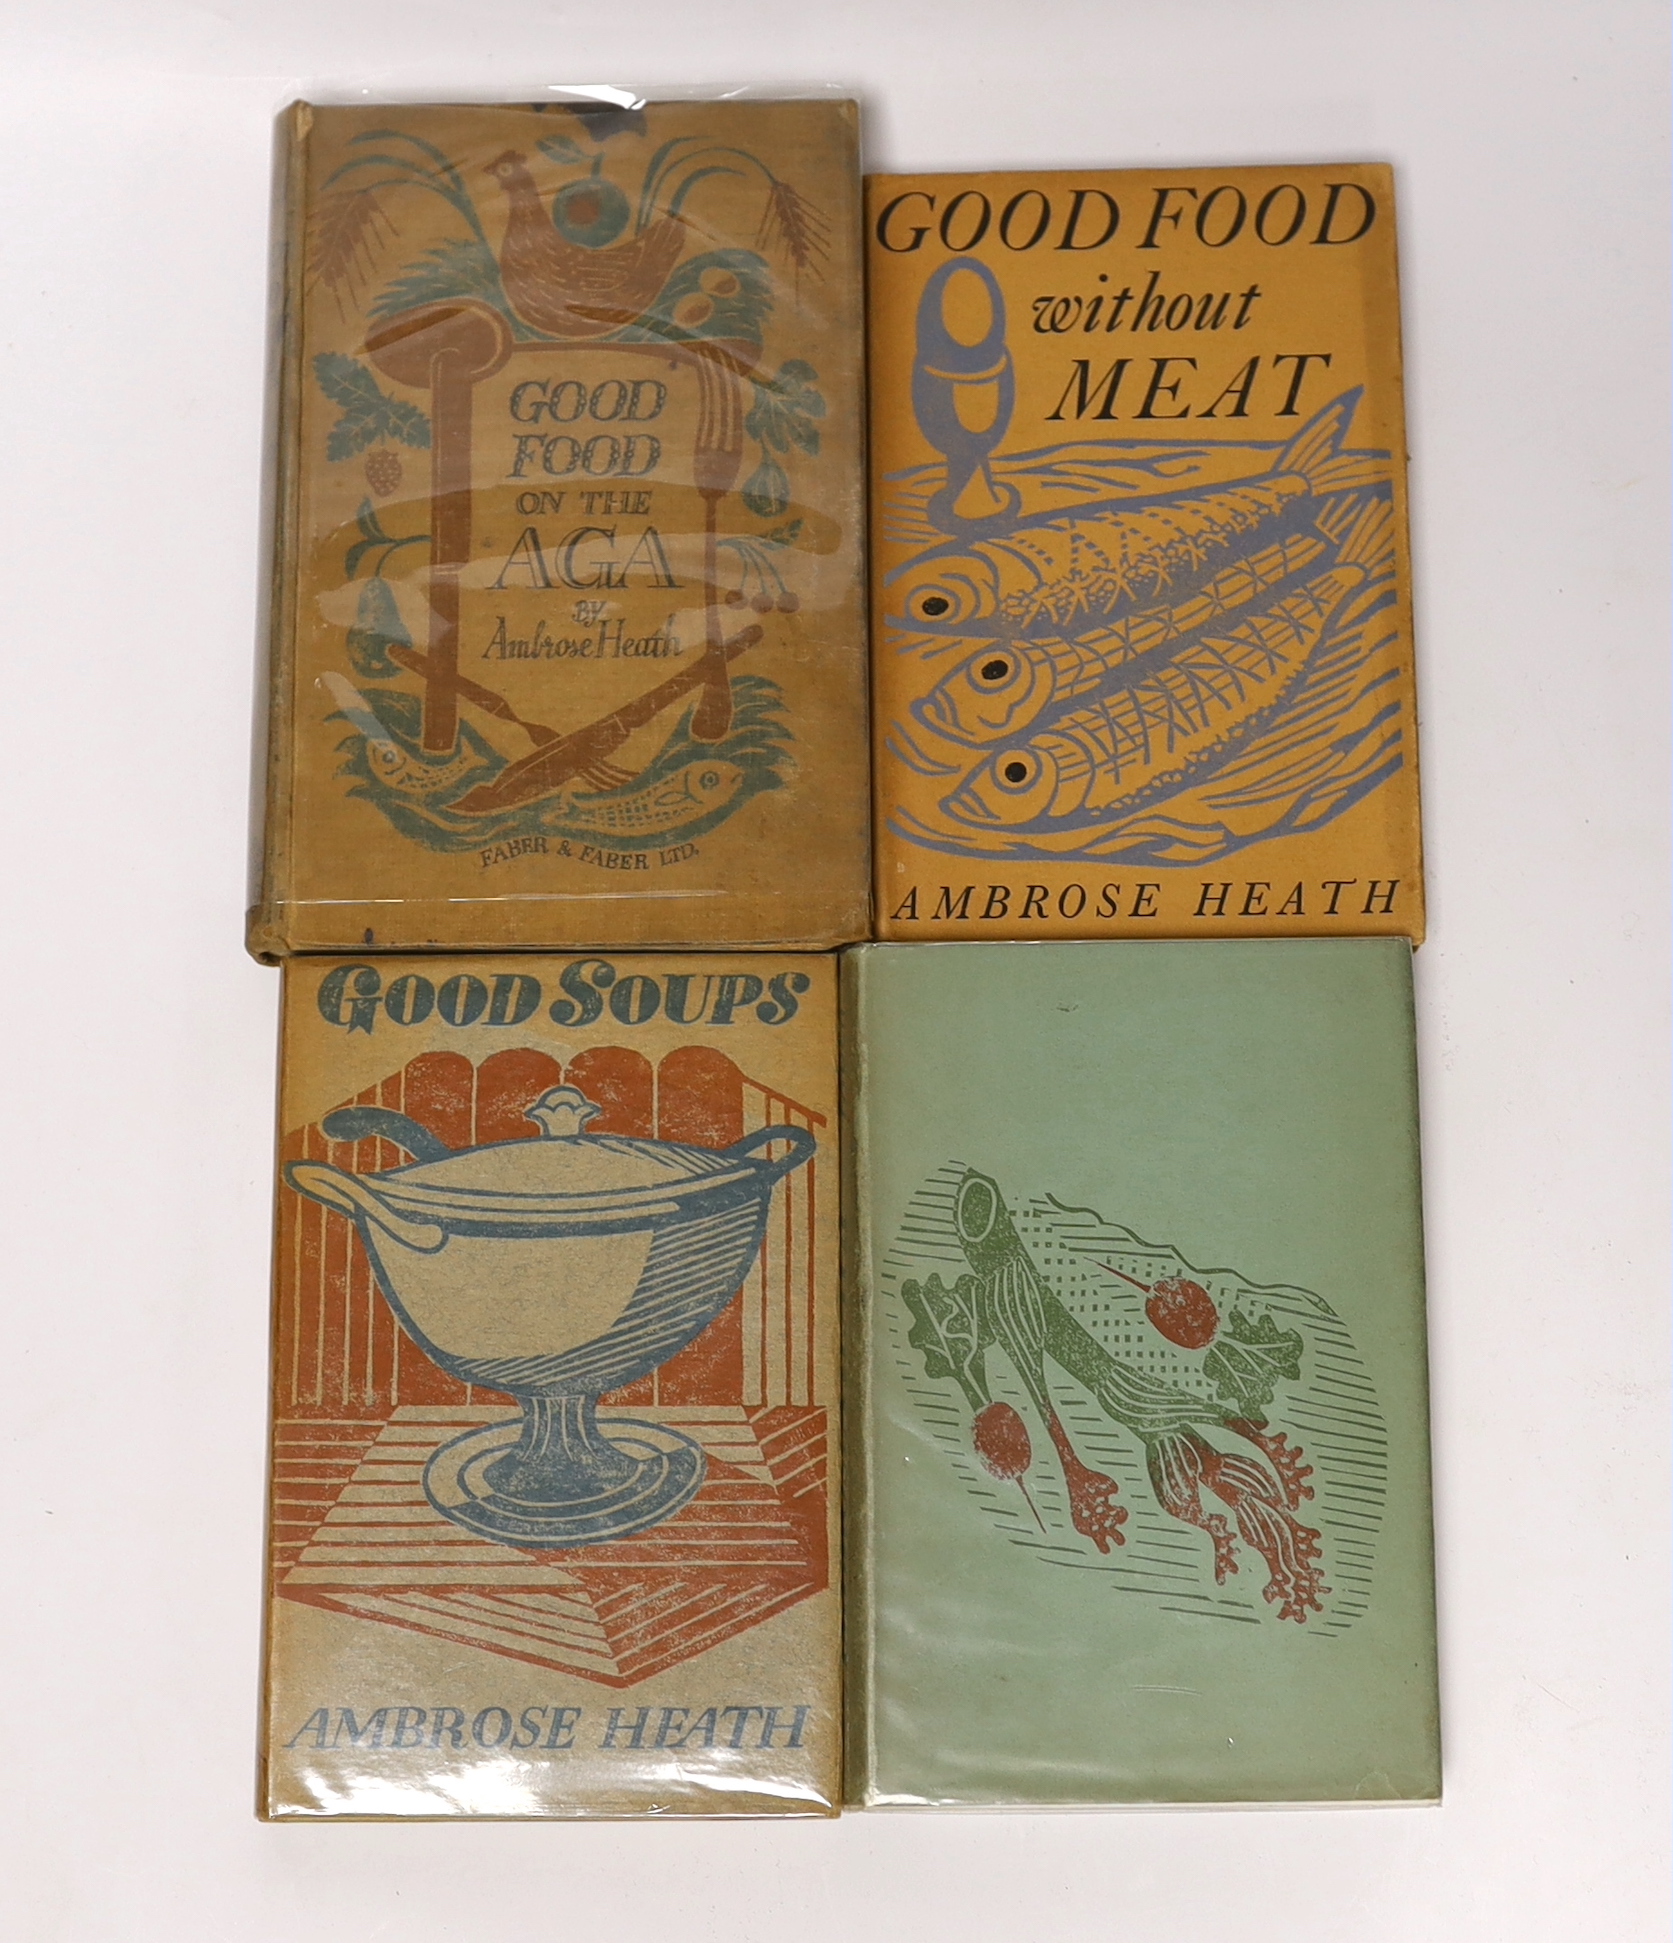 Bawden, Edward - 5 works with dust jackets and other illustrations by Edward Bawden, consisting:- All by Ambrose Heath - Good Food on an Aga, 1933; Good Soups, 1935; Good Sweets, 1937, Vegetable Dishes and Salads, 1938;